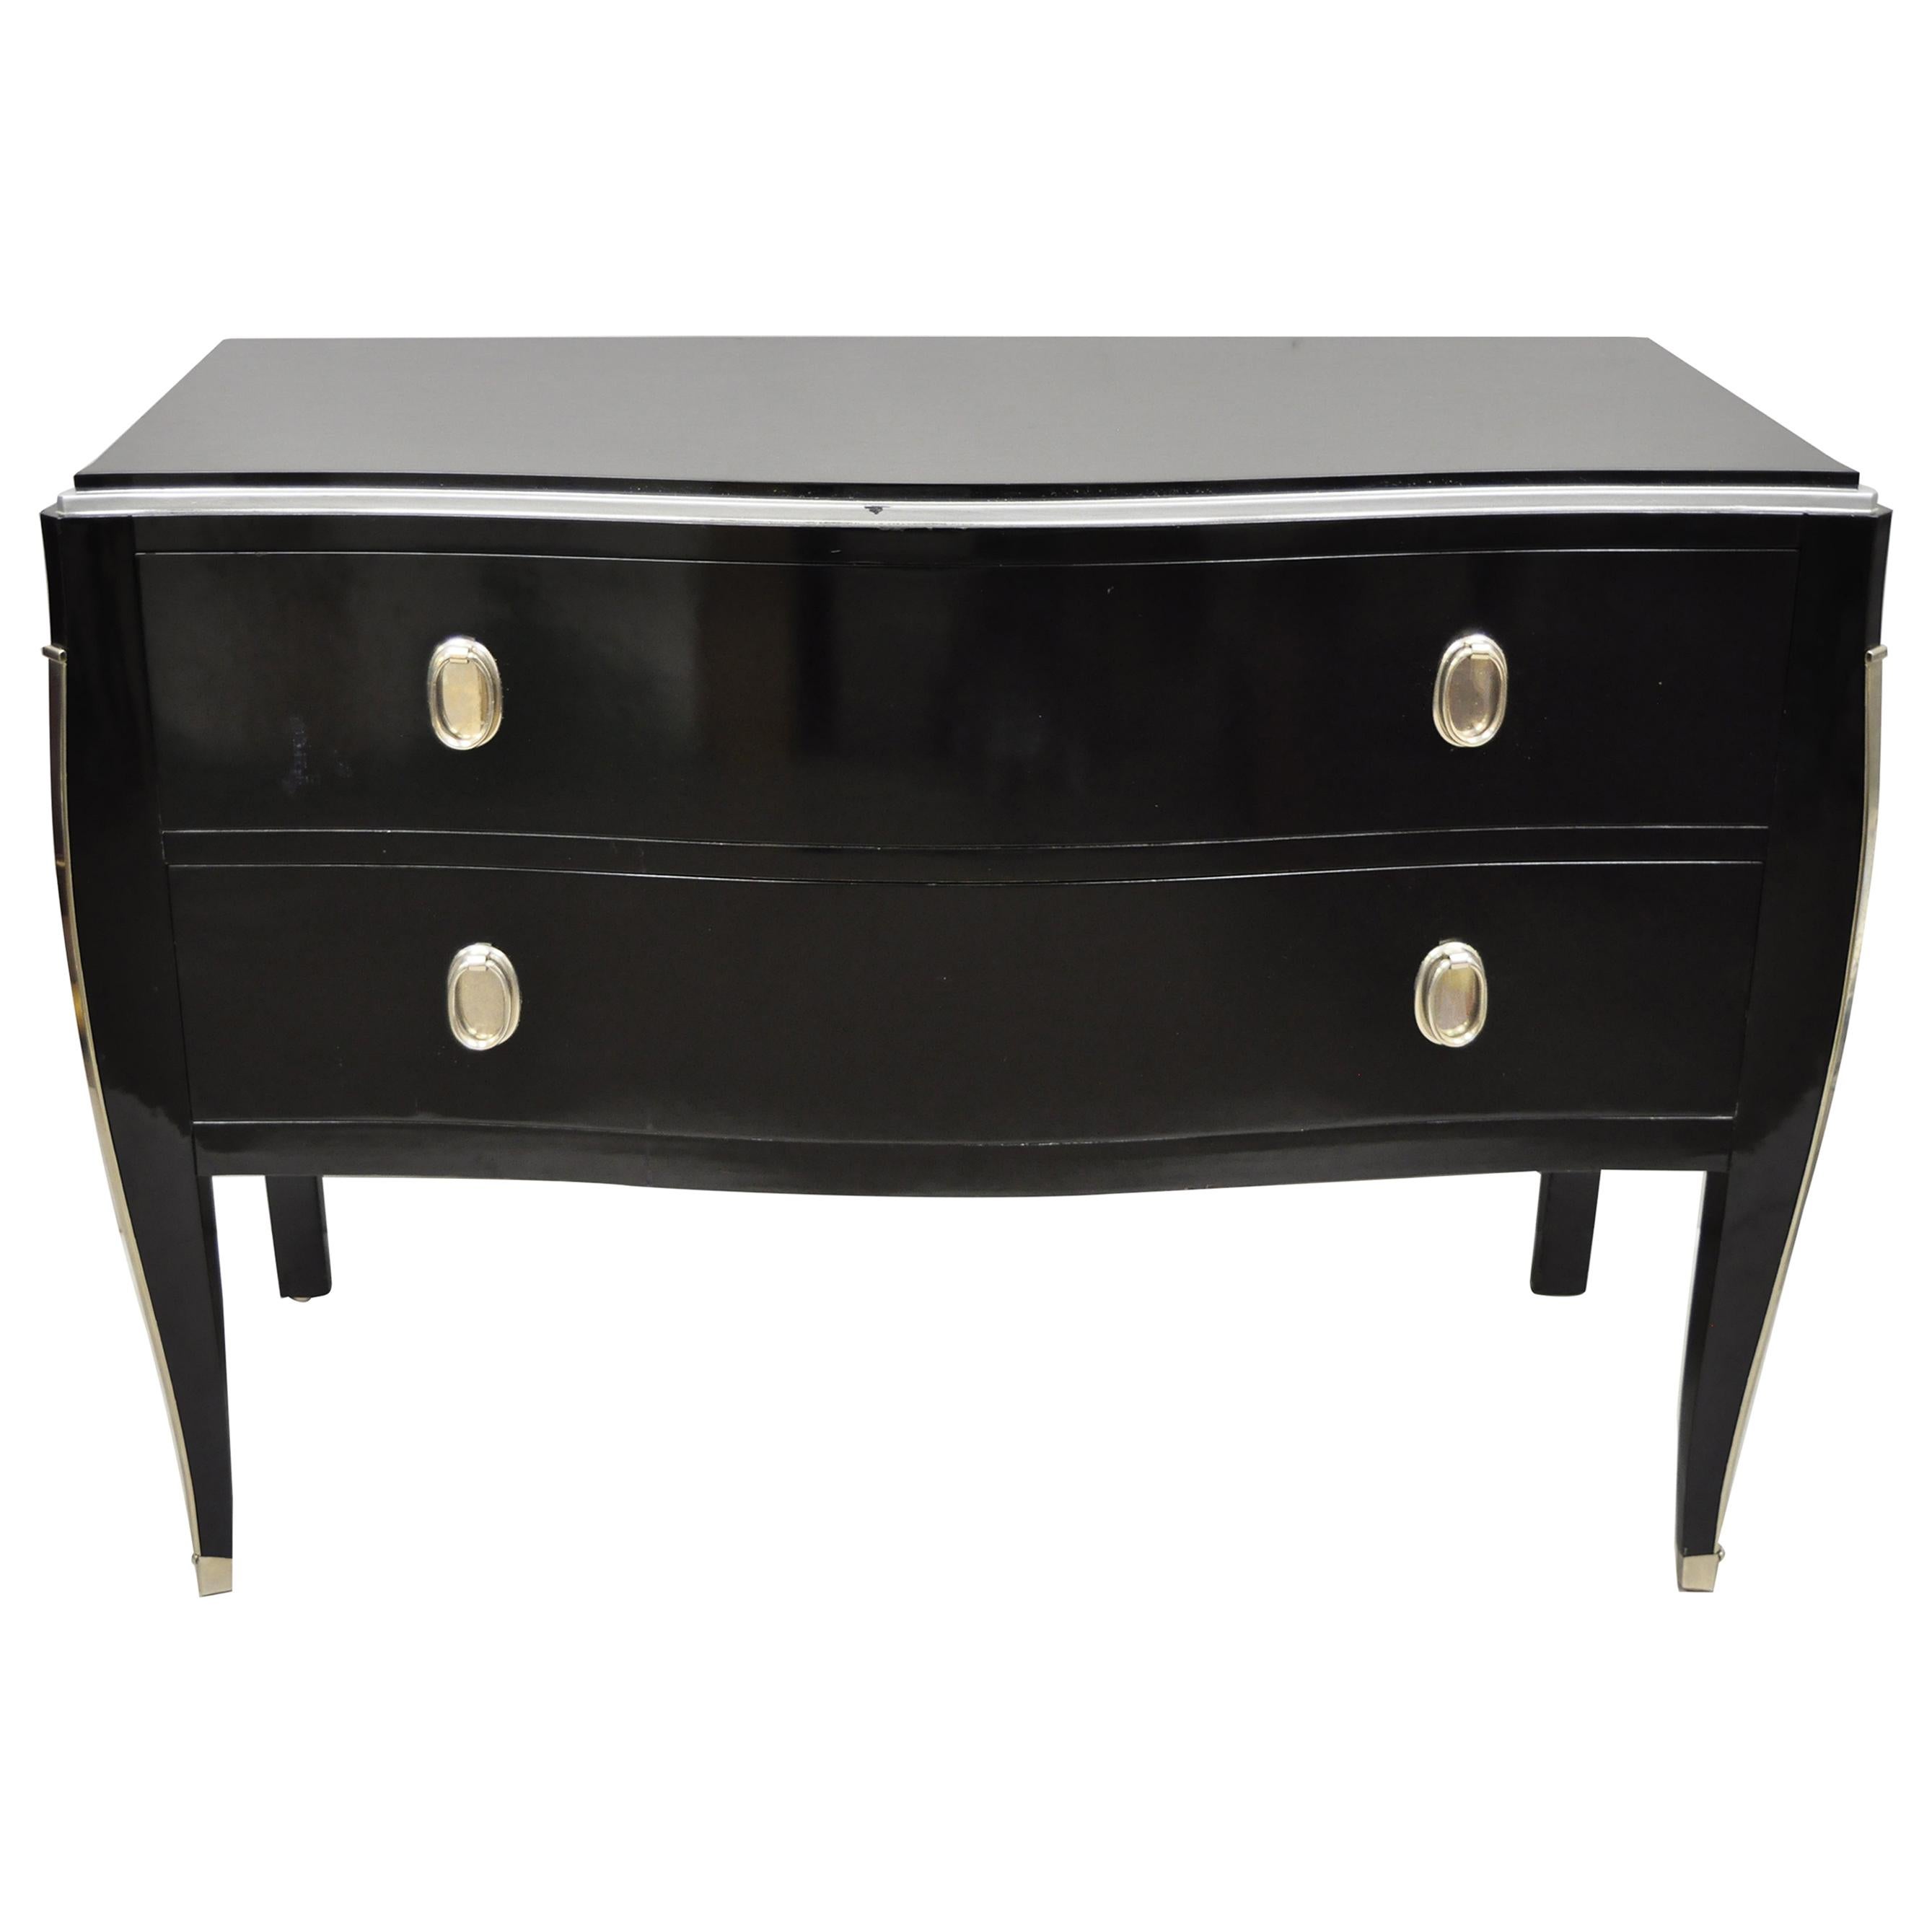 Contemporary Black Lacquer Bombe Commode 2-Drawer Italian Chest by Zichele For Sale